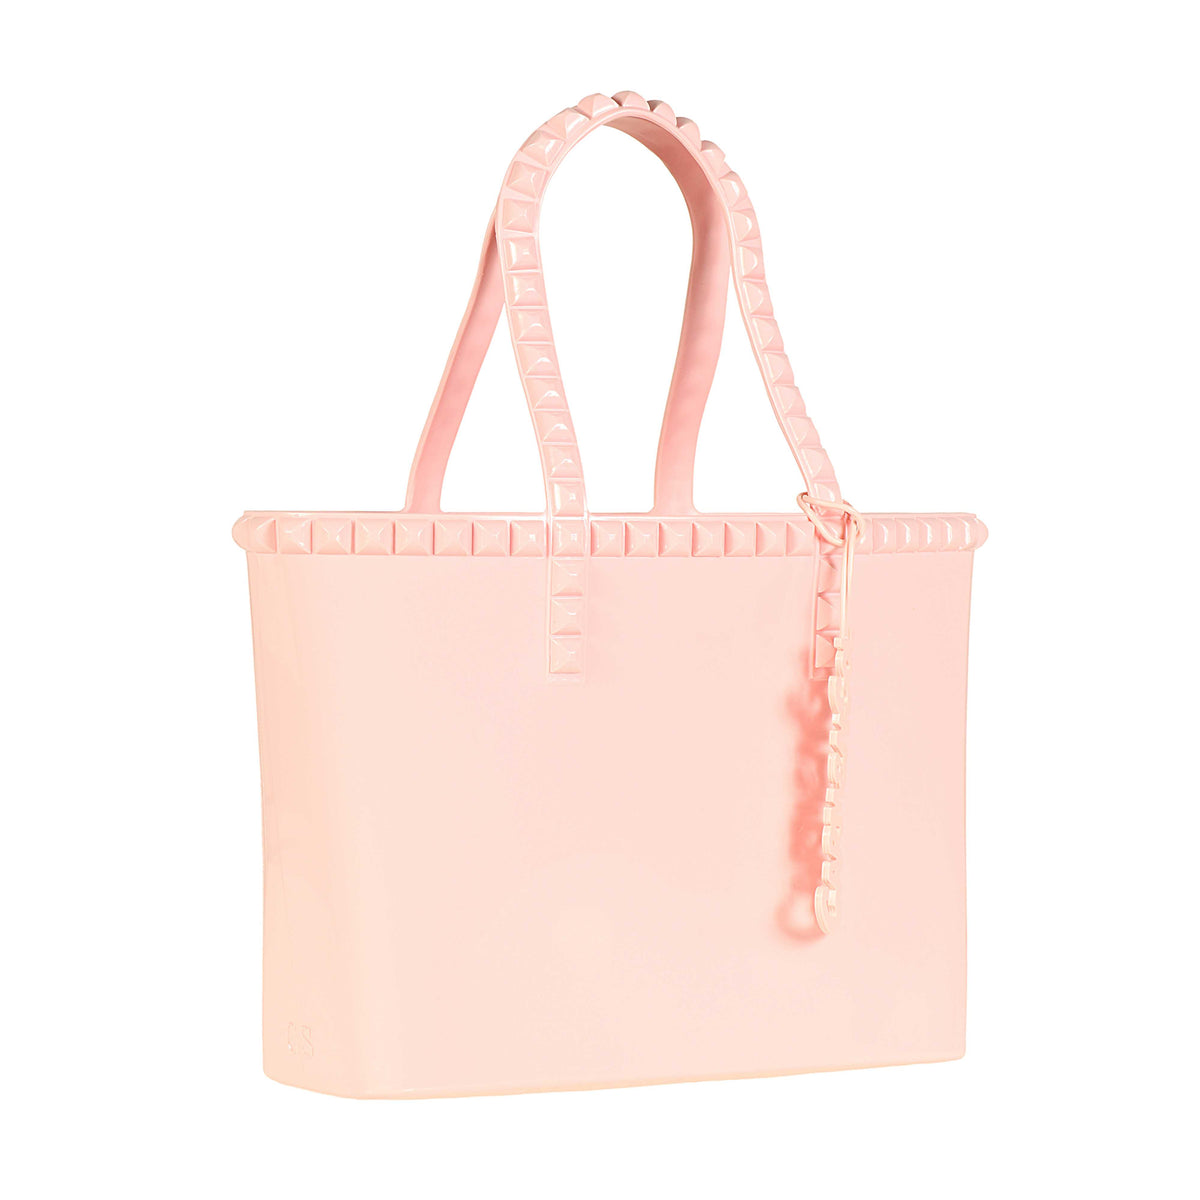 Jumbo studded Carmen Sol jelly bags in color baby pink